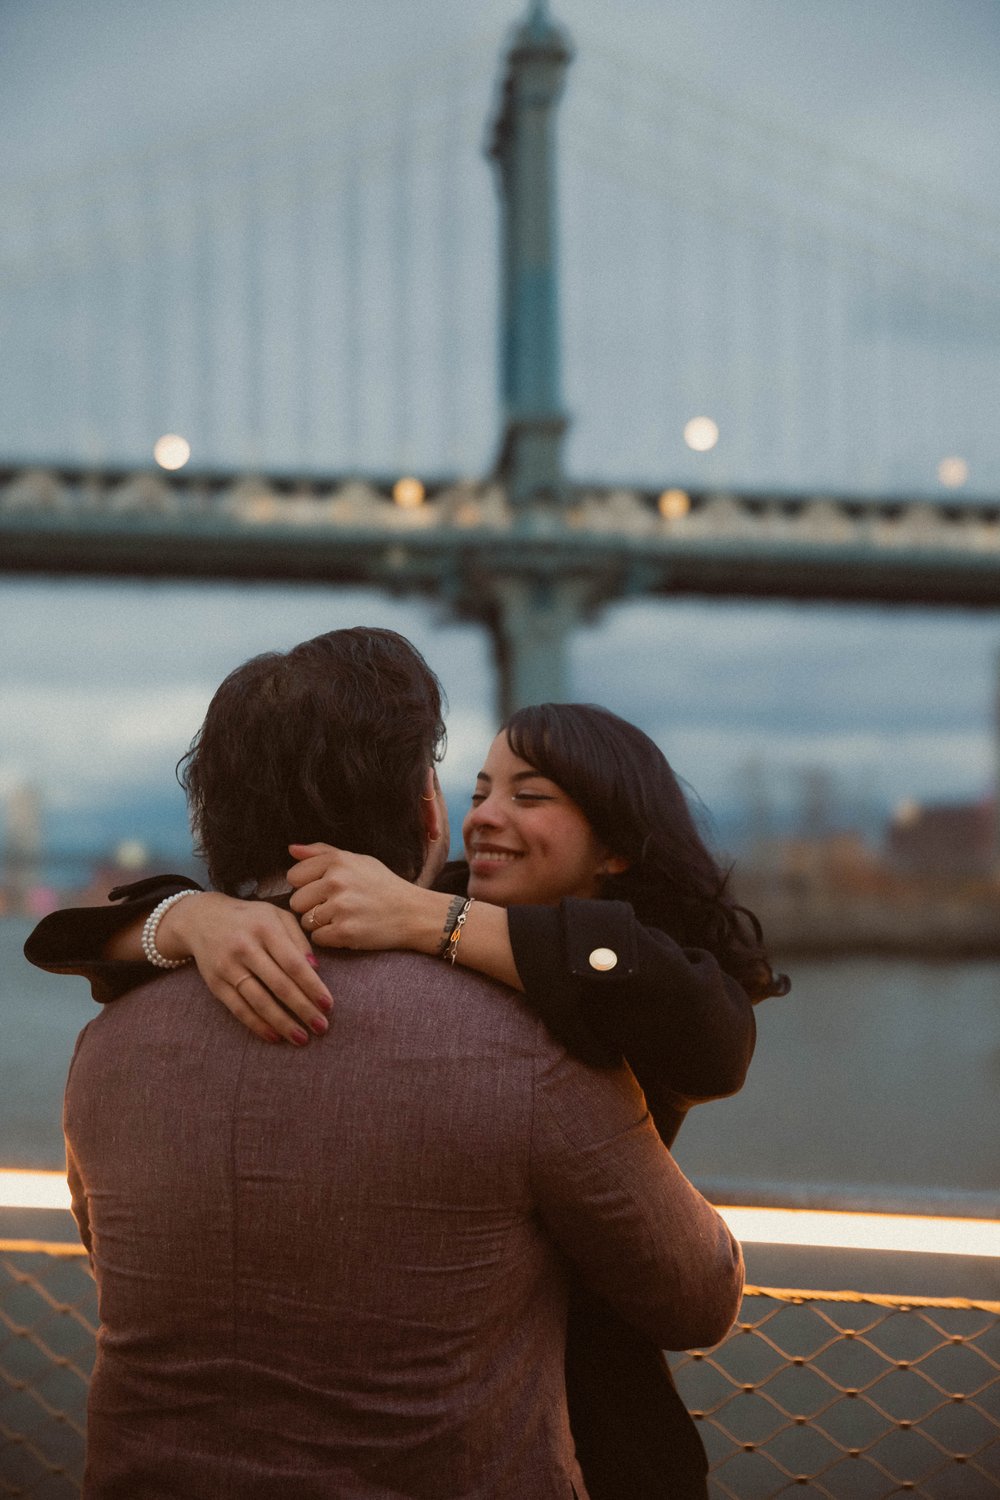 Curious about effortlessly candid couple photos in just 30 minutes? Find out how a shared vision and a game plan can lead to unforgettable moments.